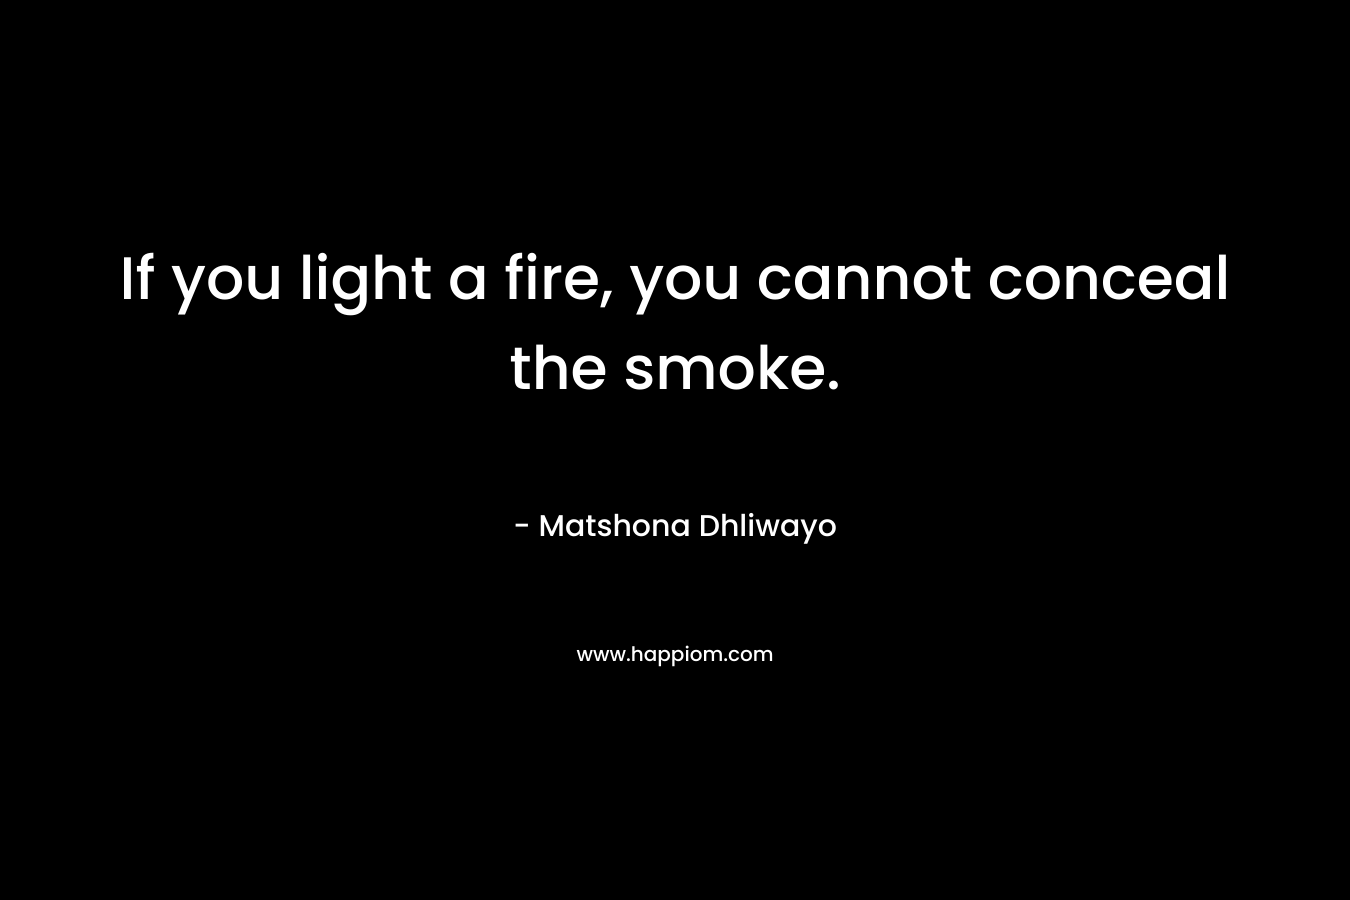 If you light a fire, you cannot conceal the smoke.